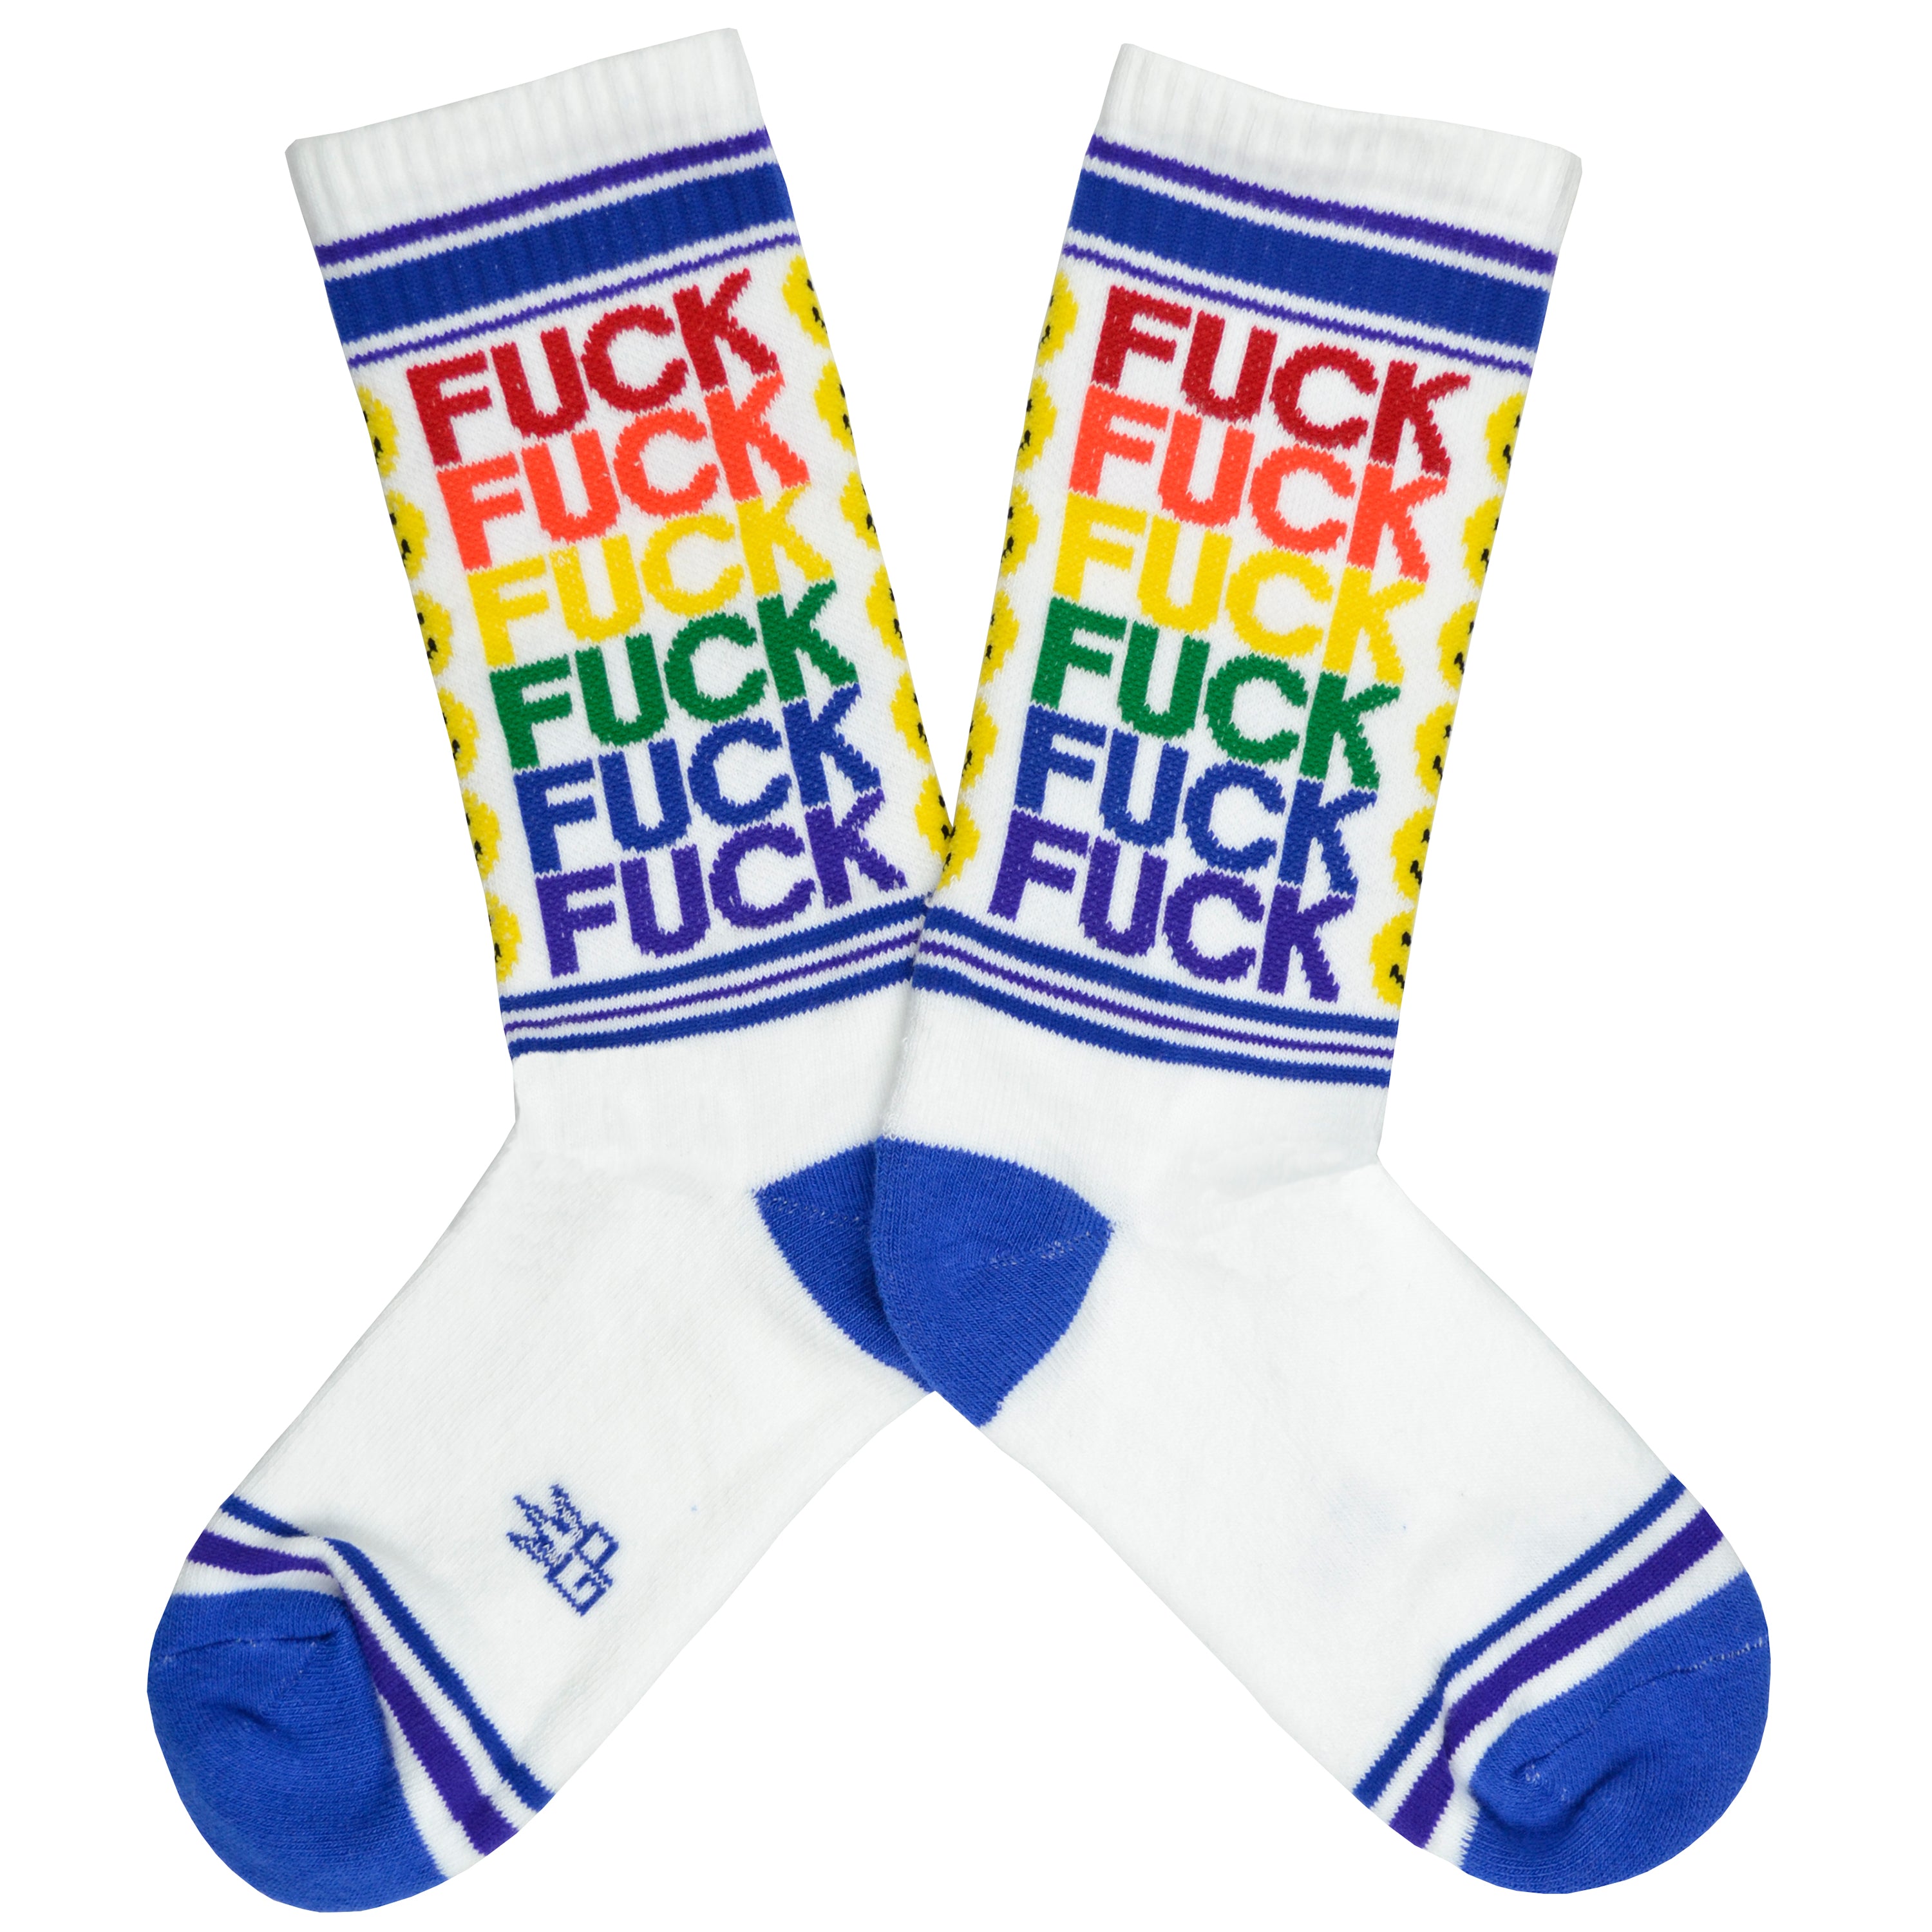 These white cotton unisex crew socks with a blue toe and striped cuff by the brand Gumball Poodle feature the words 